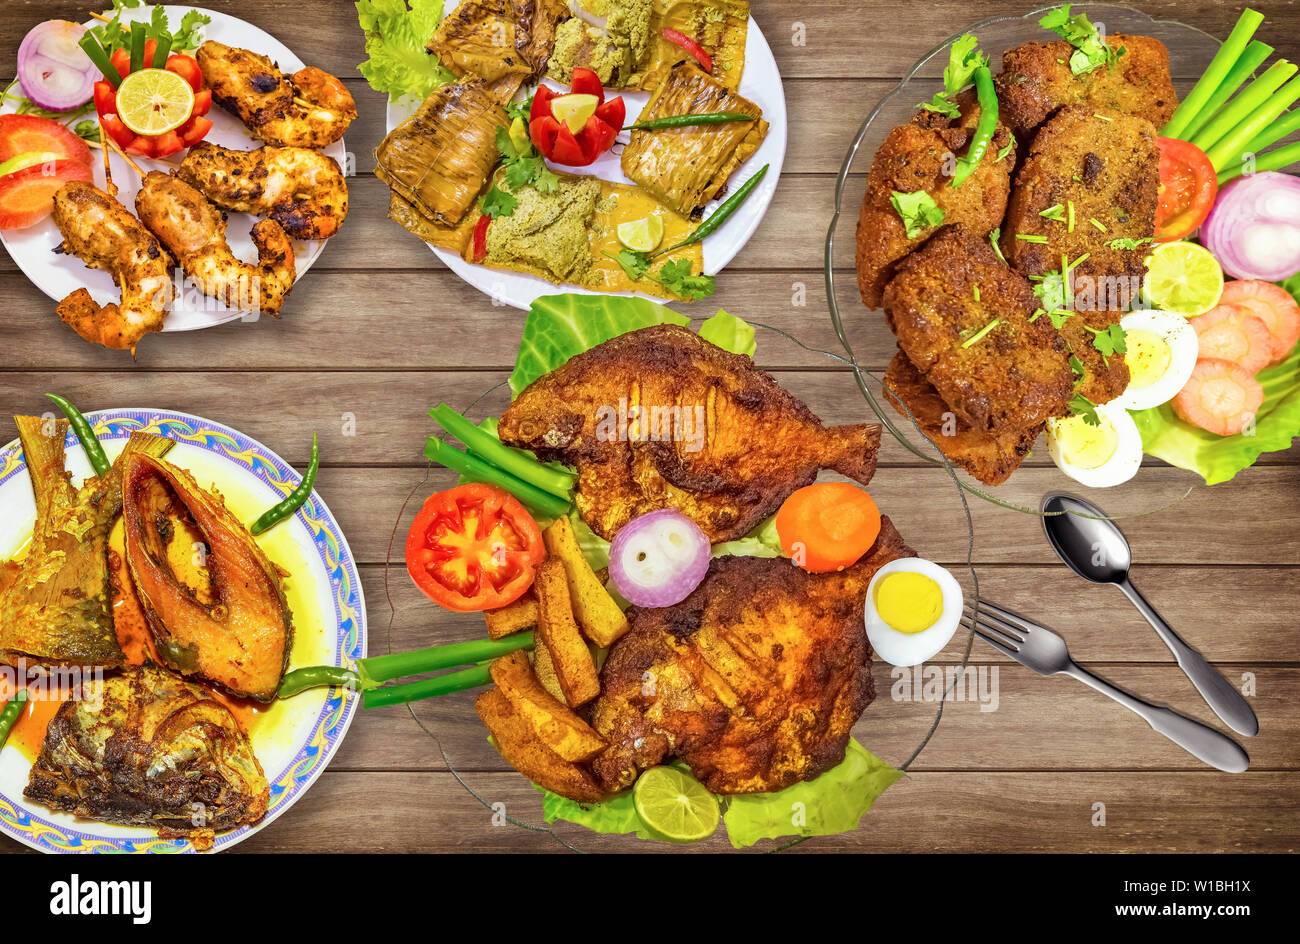 Indian fish food dishes comprising of deep fried pomfret fish with